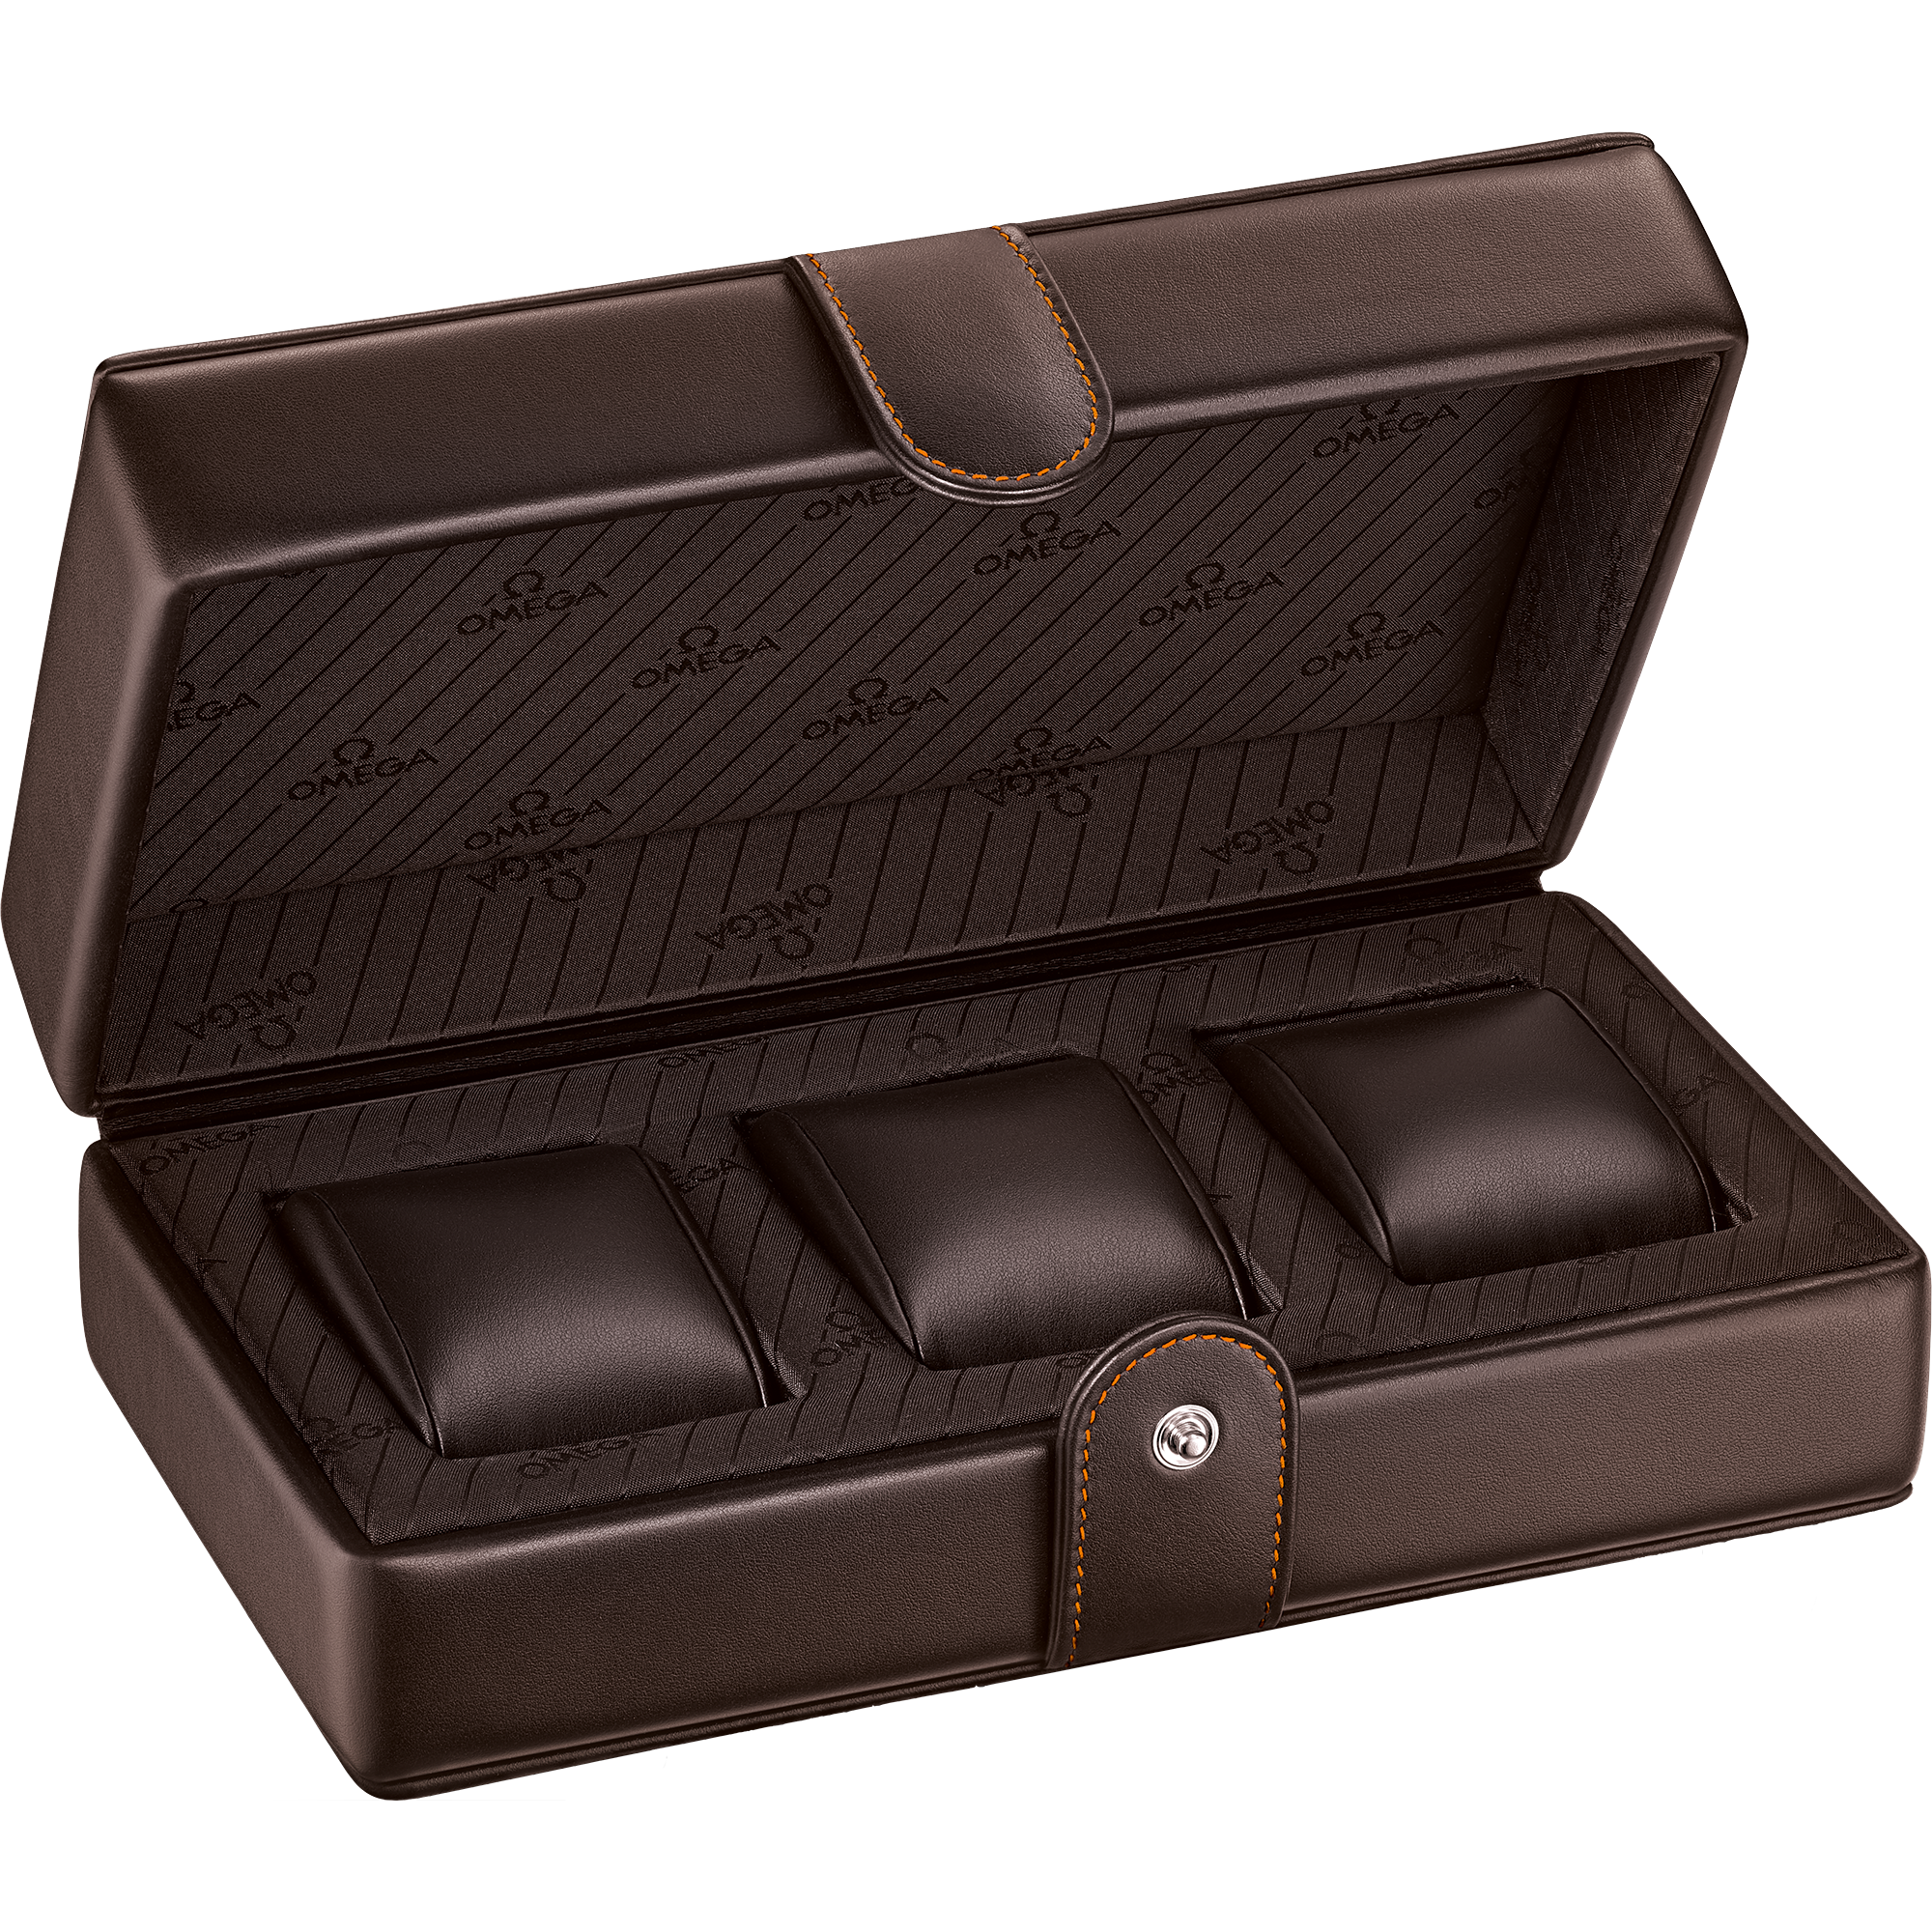 Fine Leather Watch box, Brown - 7070320013